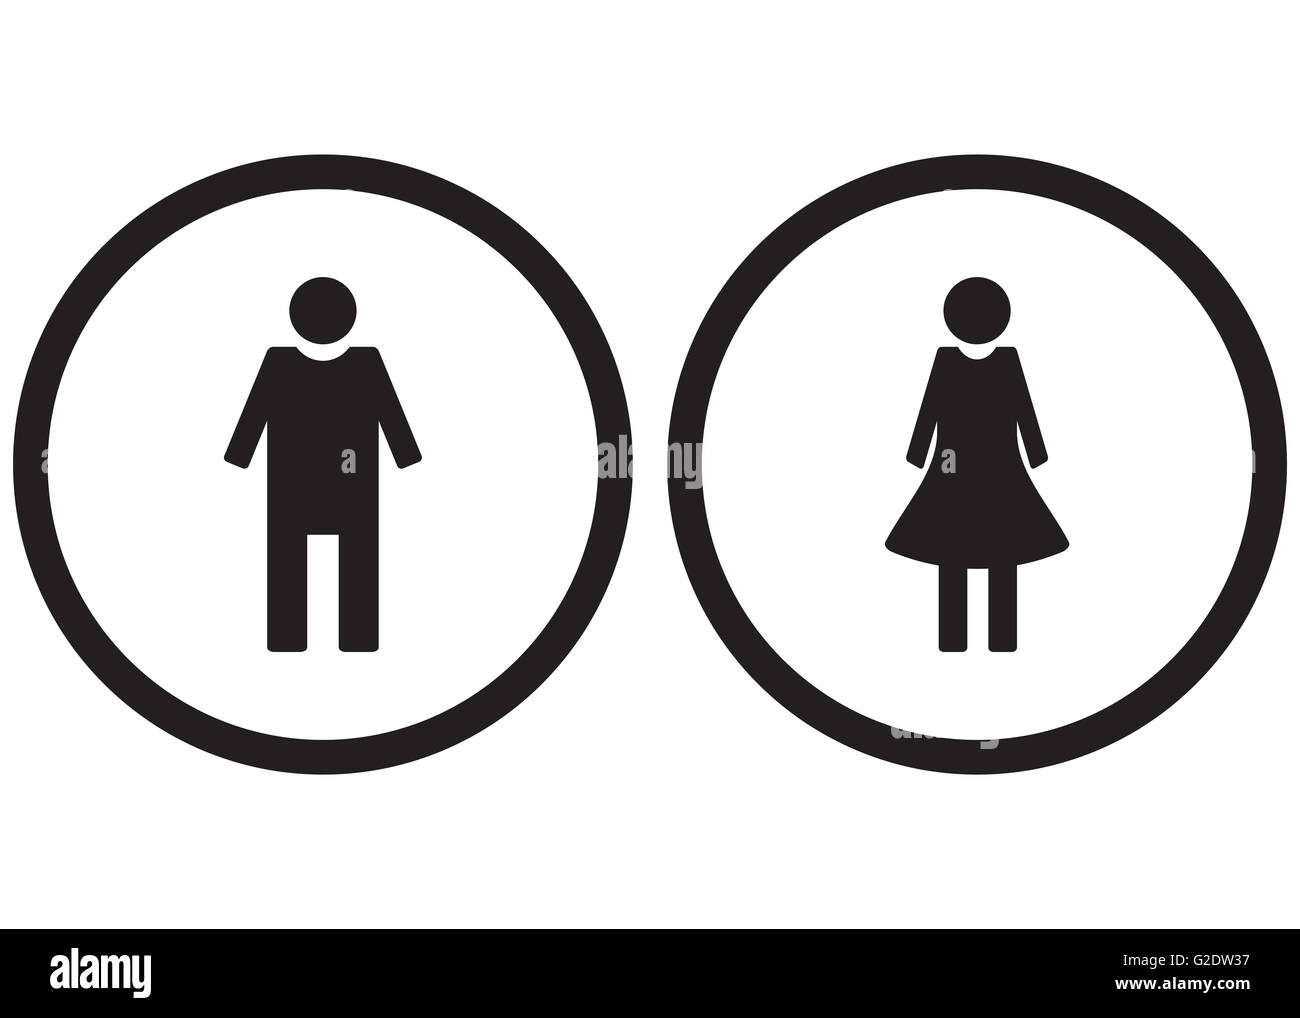 Icon set gender male and female. Restroom symbol toilet, lady and gentleman, vector illustration Stock Photo